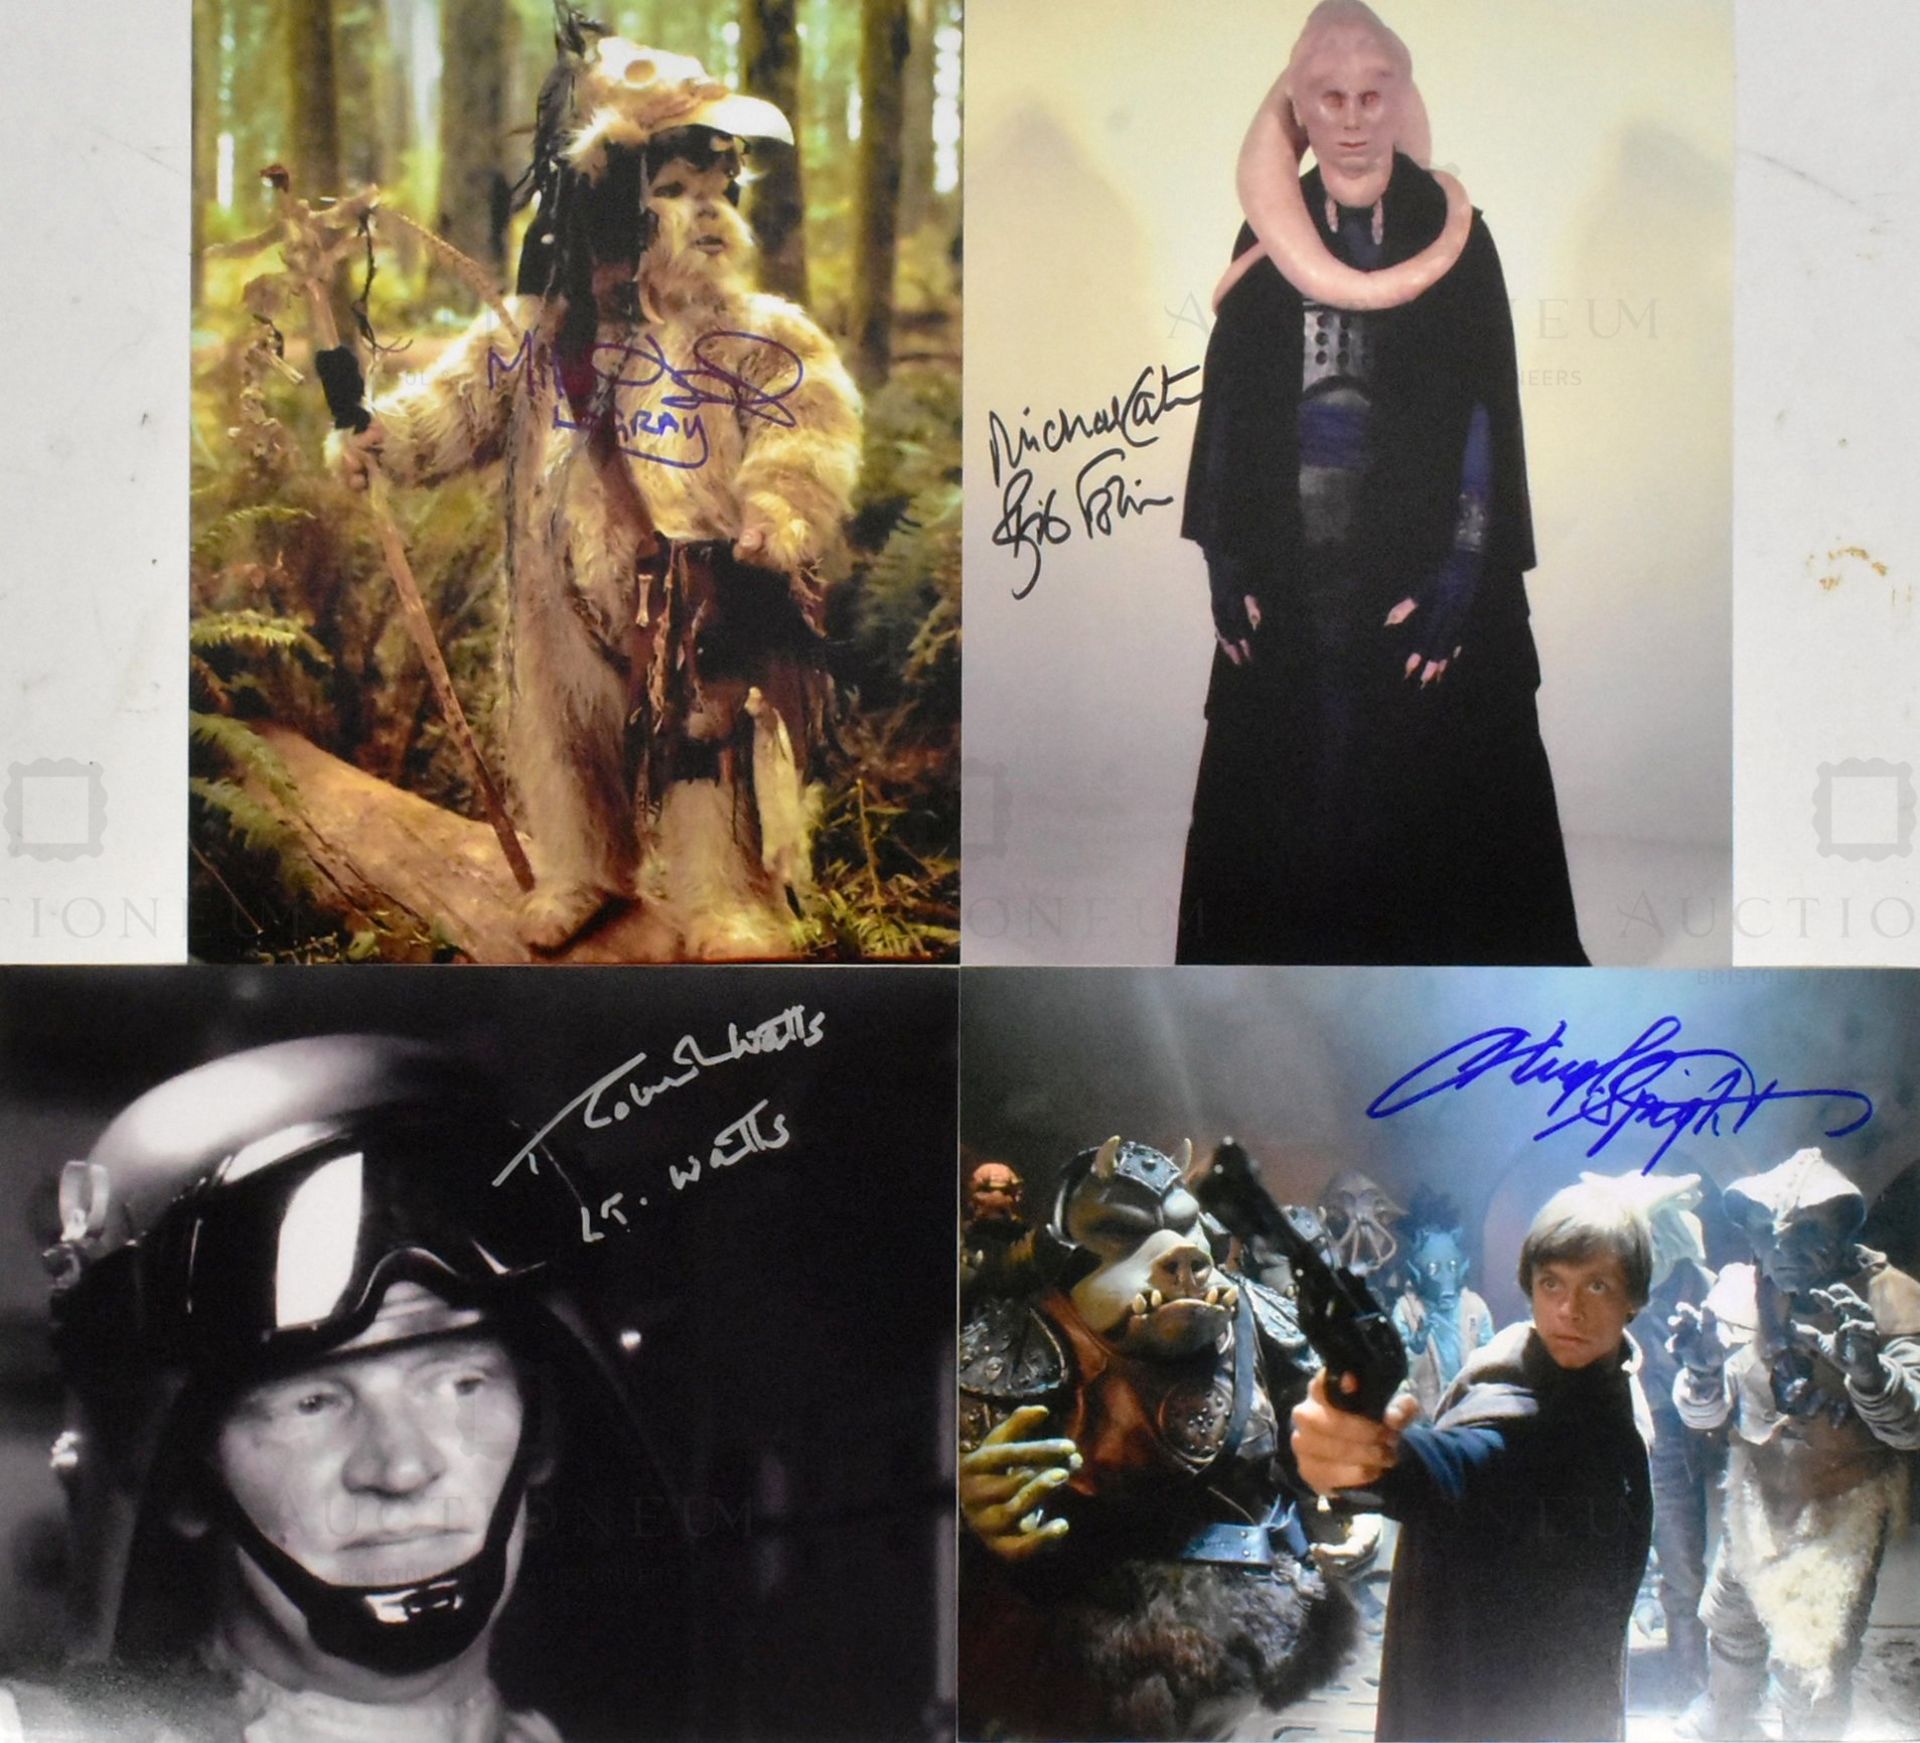 STAR WARS - RETURN OF THE JEDI - COLLECTION OF SIGNED PHOTOS